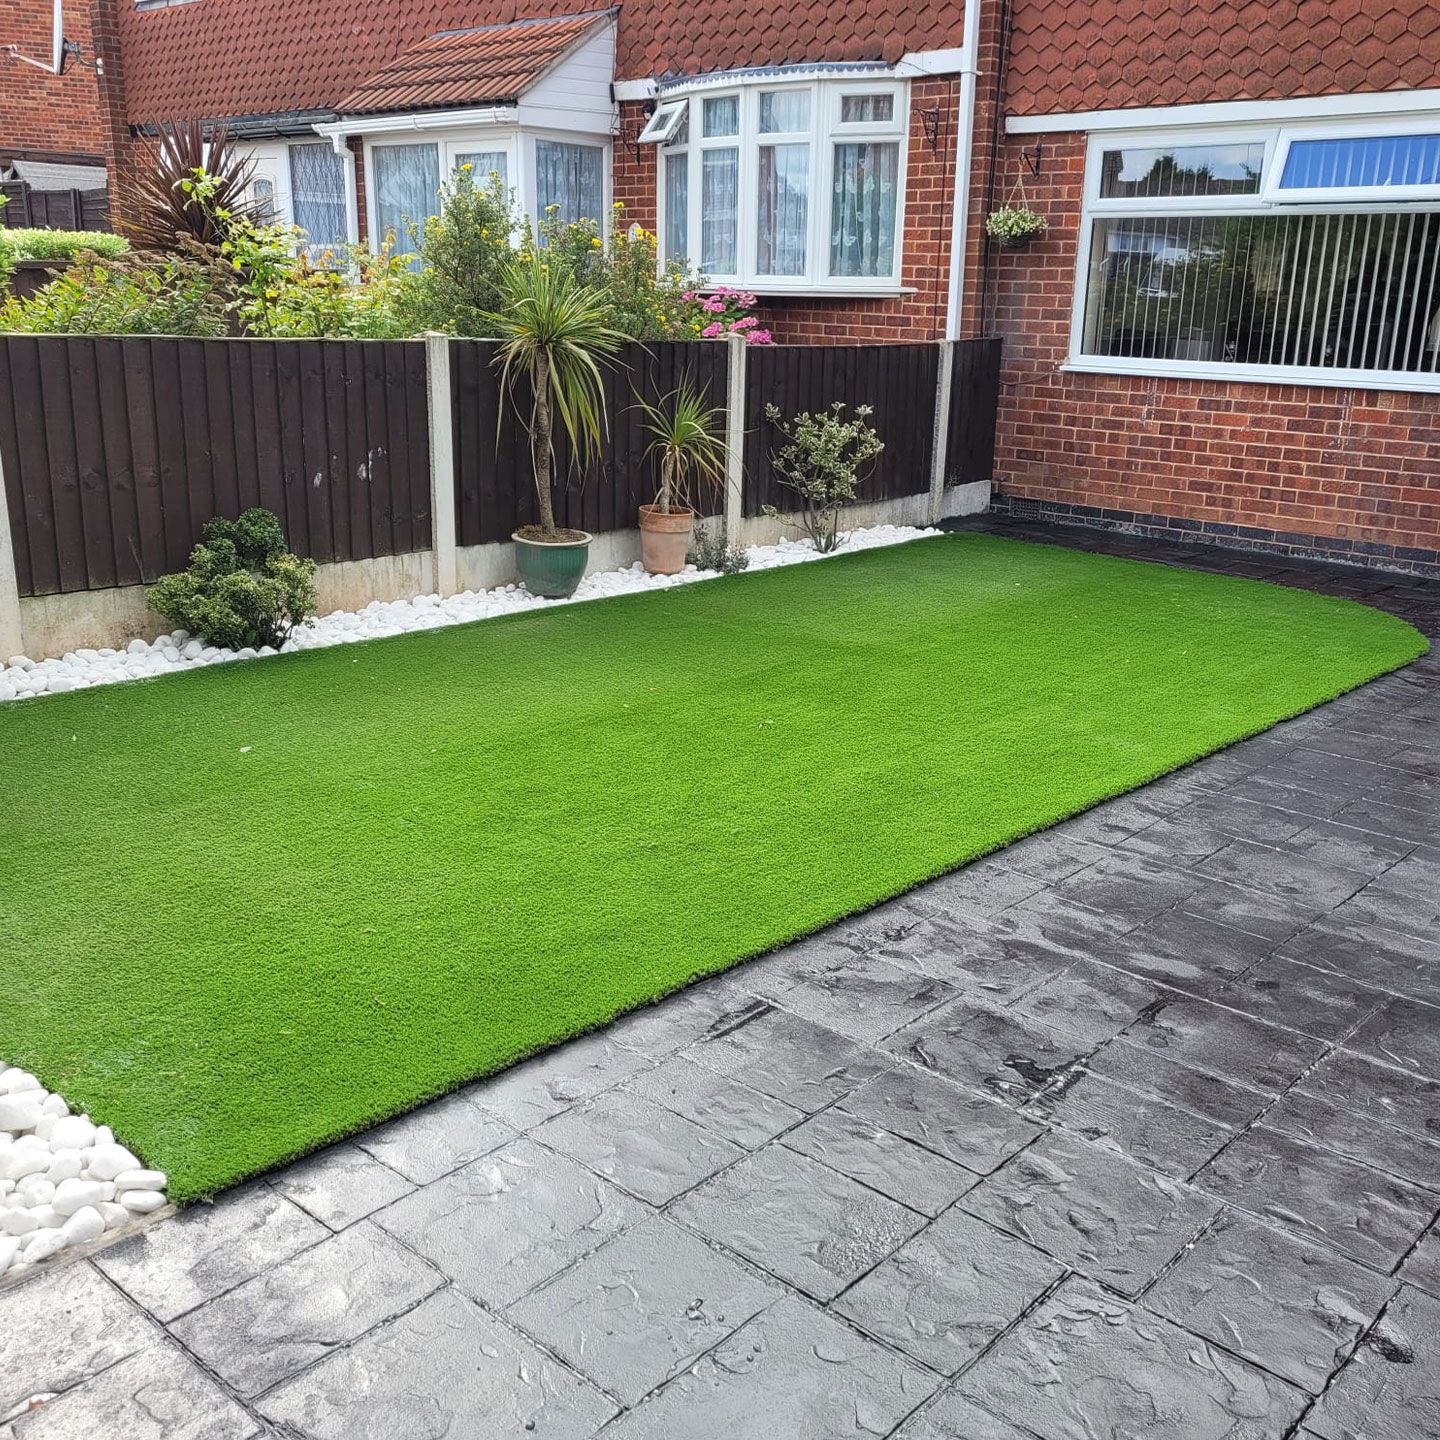 landscaping in Bedworth showing new artificial grass and patterned concrete paving